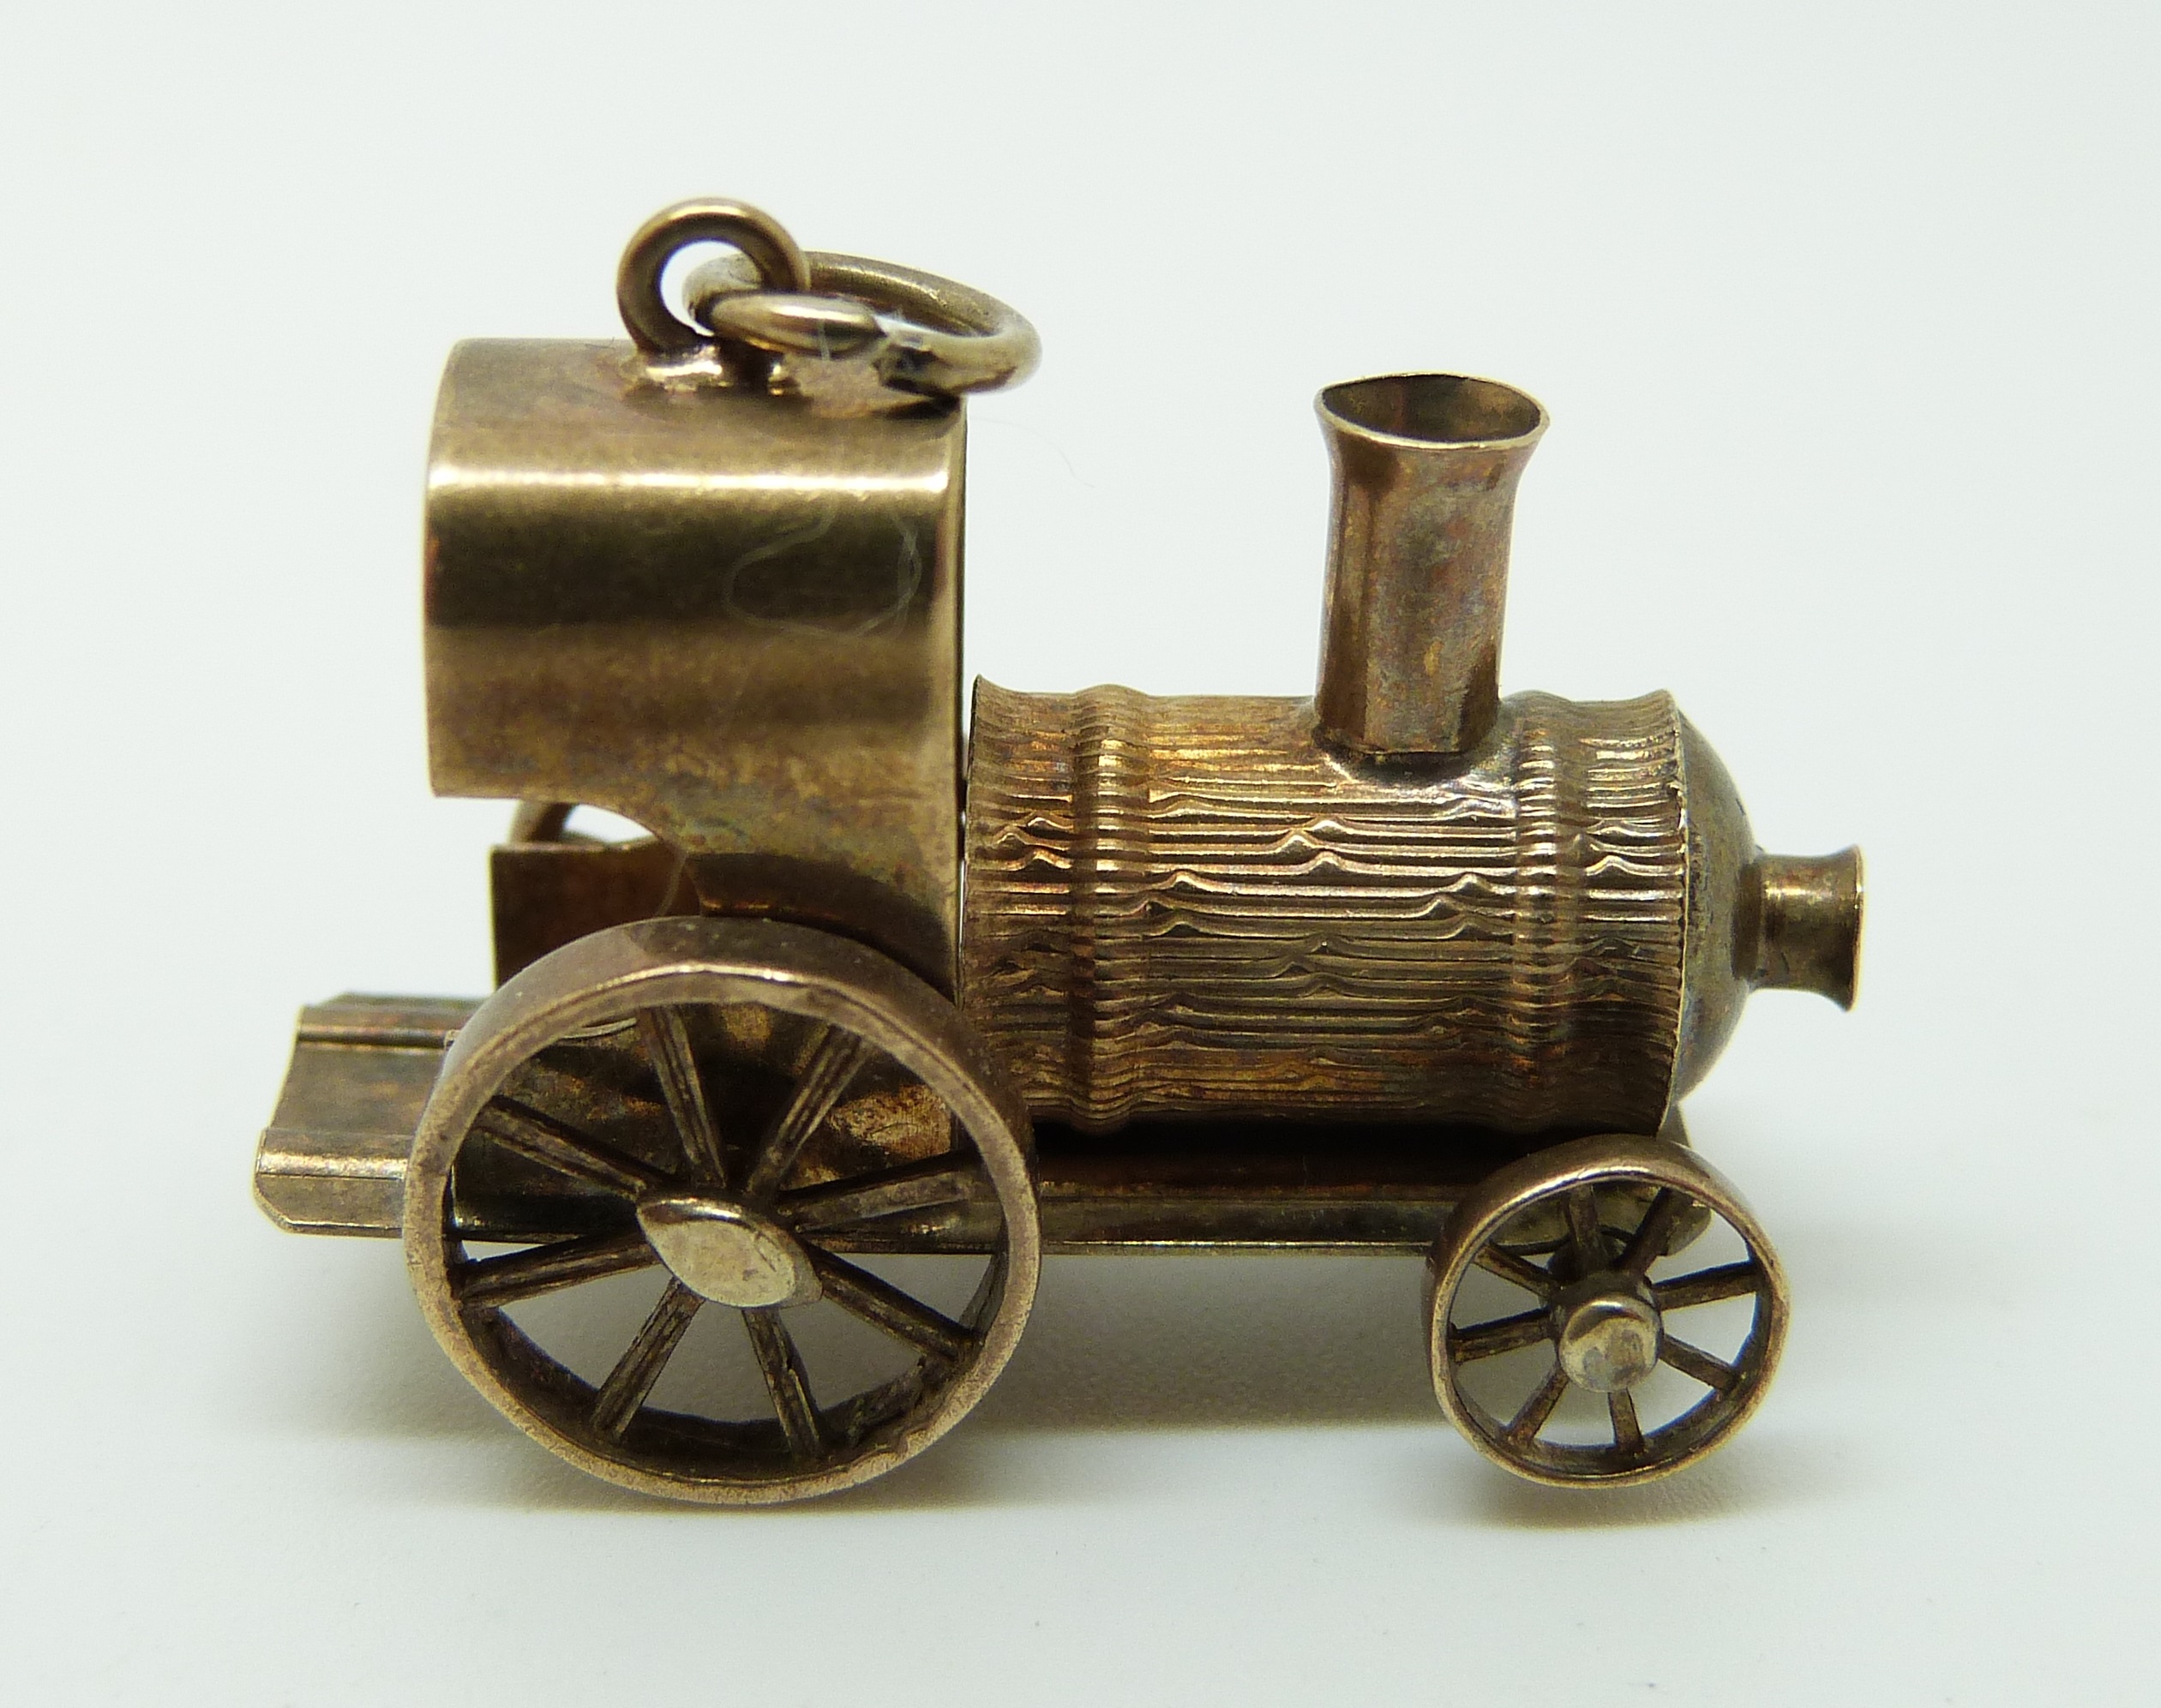 A 9ct gold charm or pendant in the form of a train, 5.